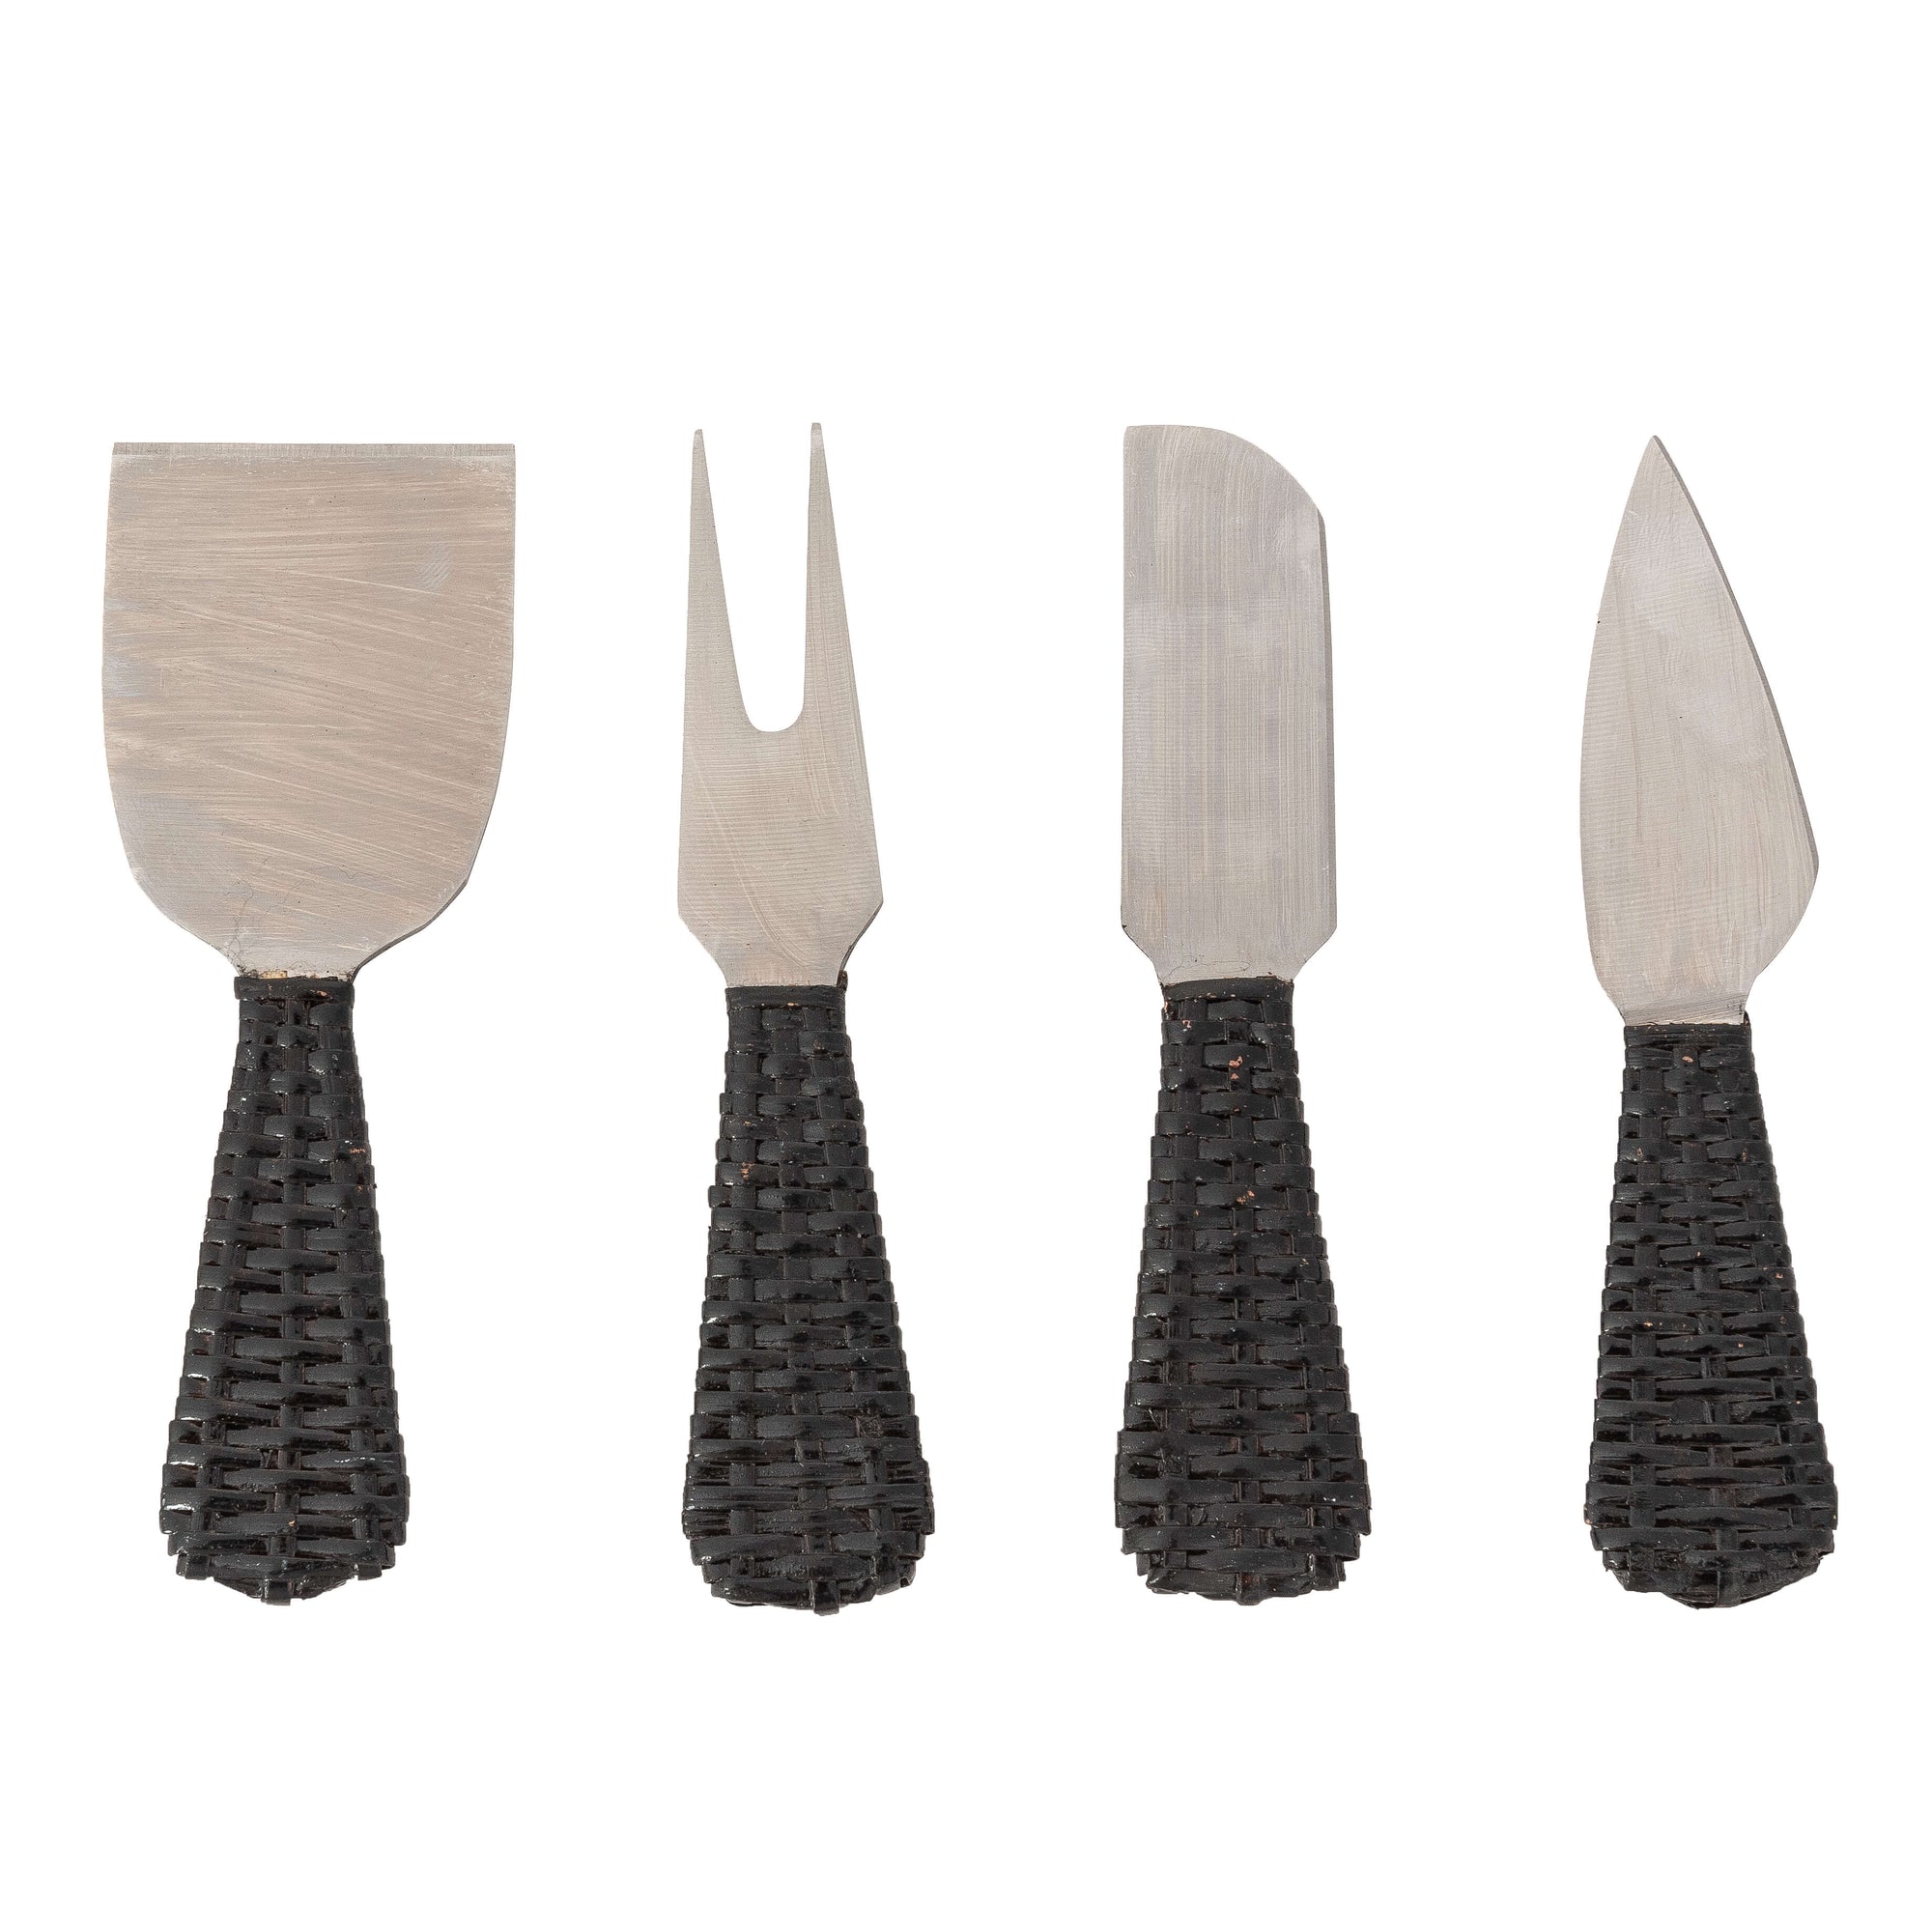 Rattan Stainless-Steel Cheese Knives (Set of 4) - with Gift Box